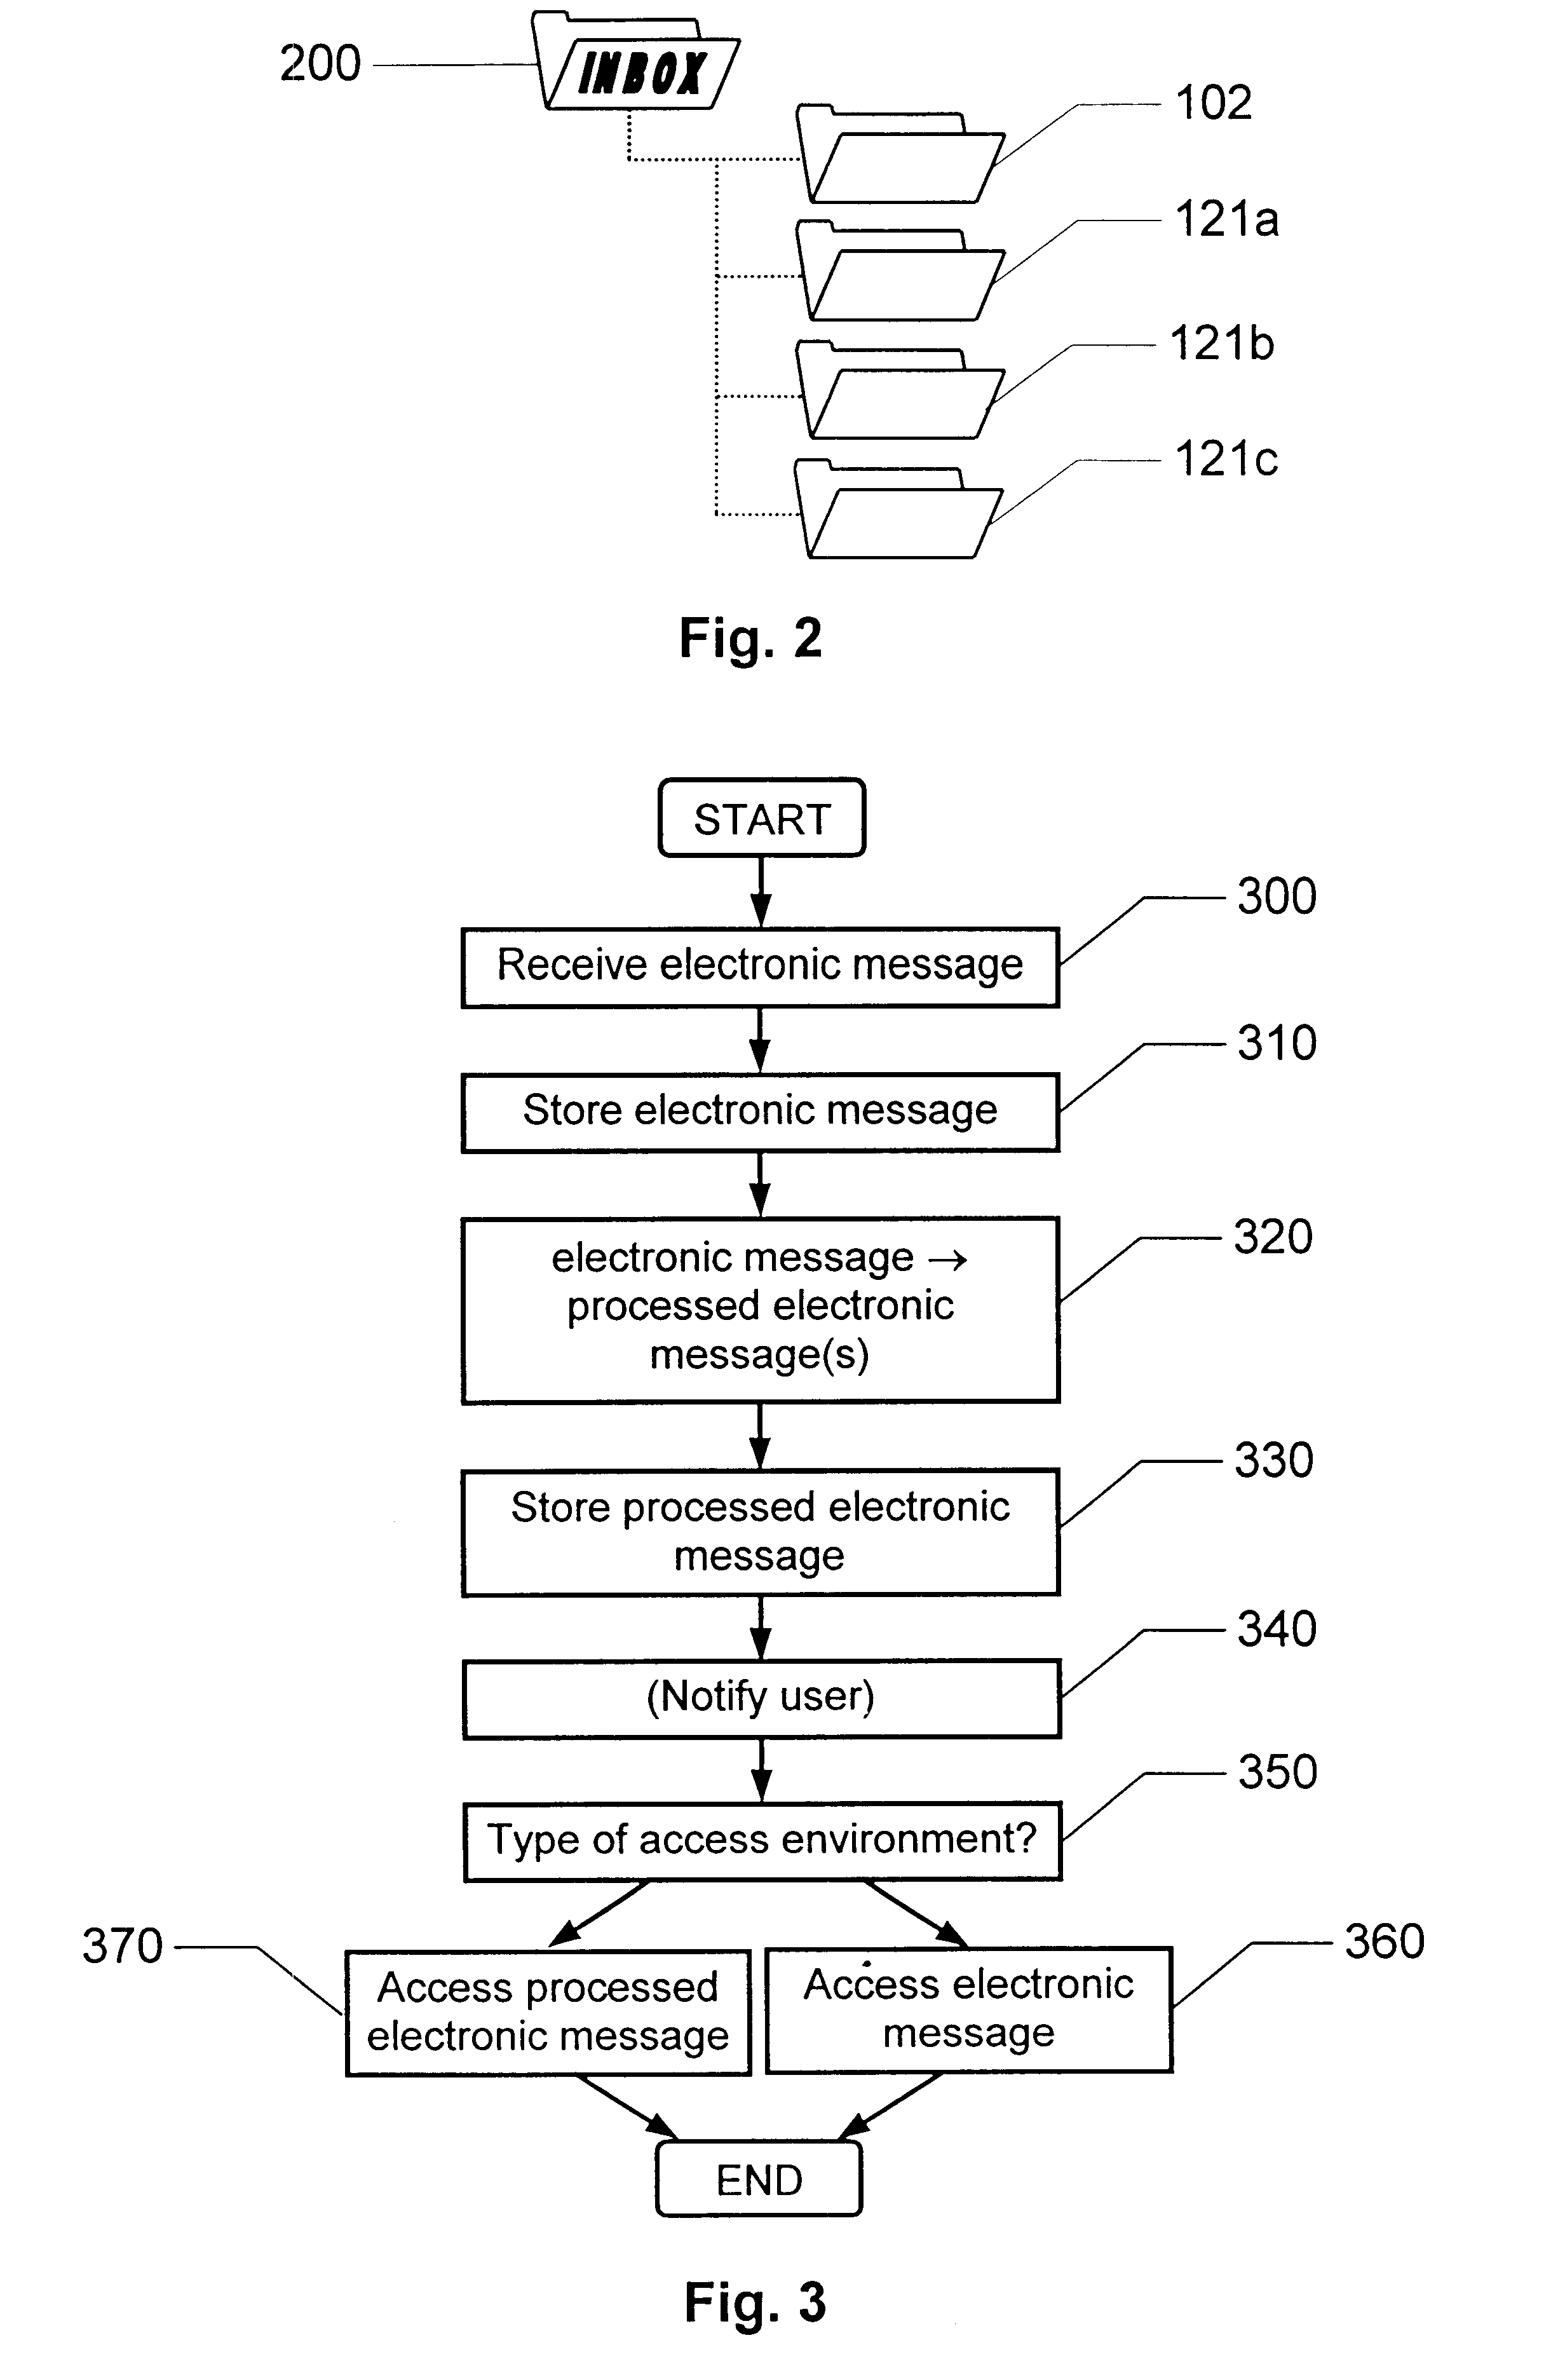 Method and apparatus for organizing and accessing electronic messages in a telecommunications system